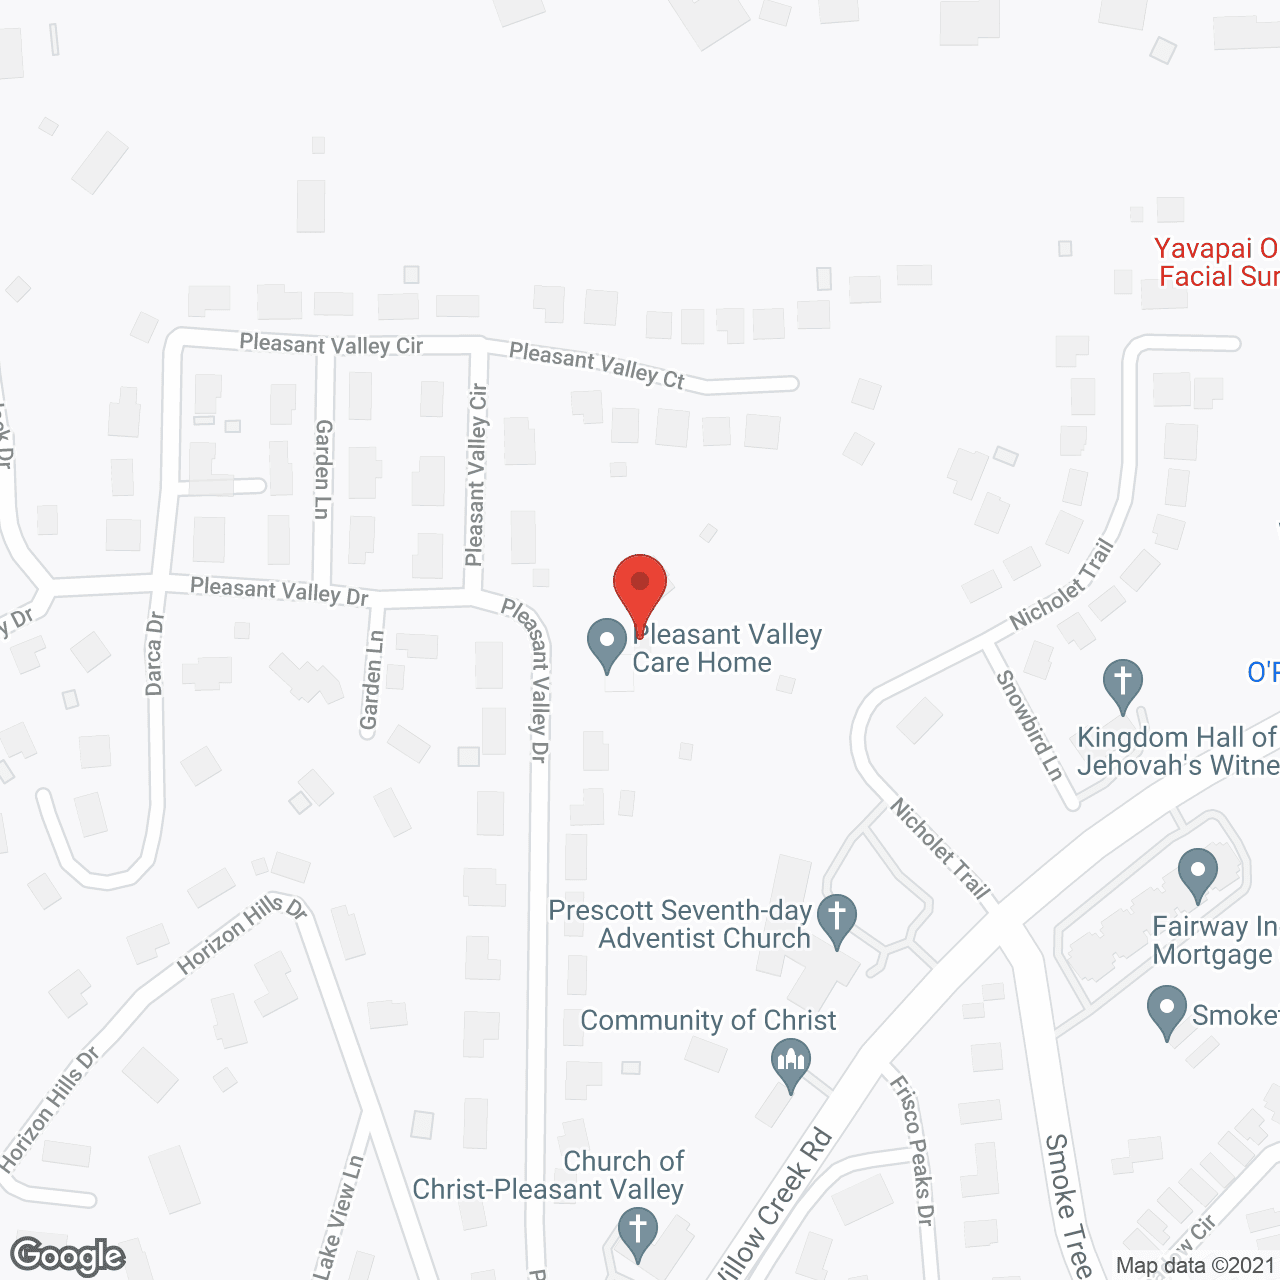 Pleasant Valley Care Home in google map